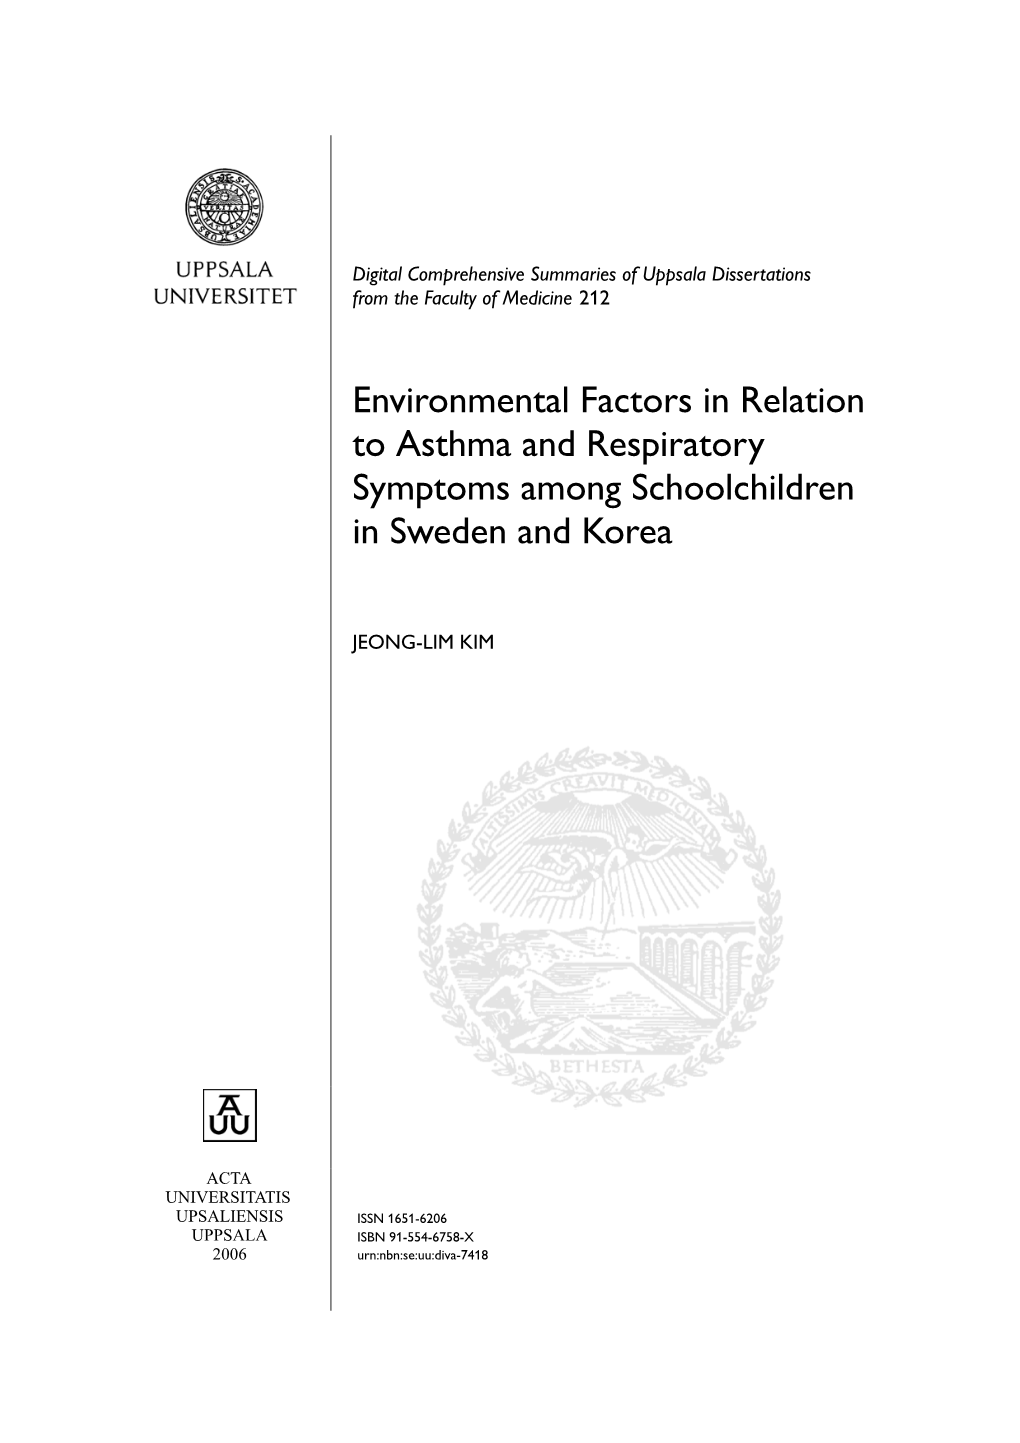 Environmental Factors in Relation to Asthma and Respiratory Symptoms Among Schoolchildren in Sweden and Korea